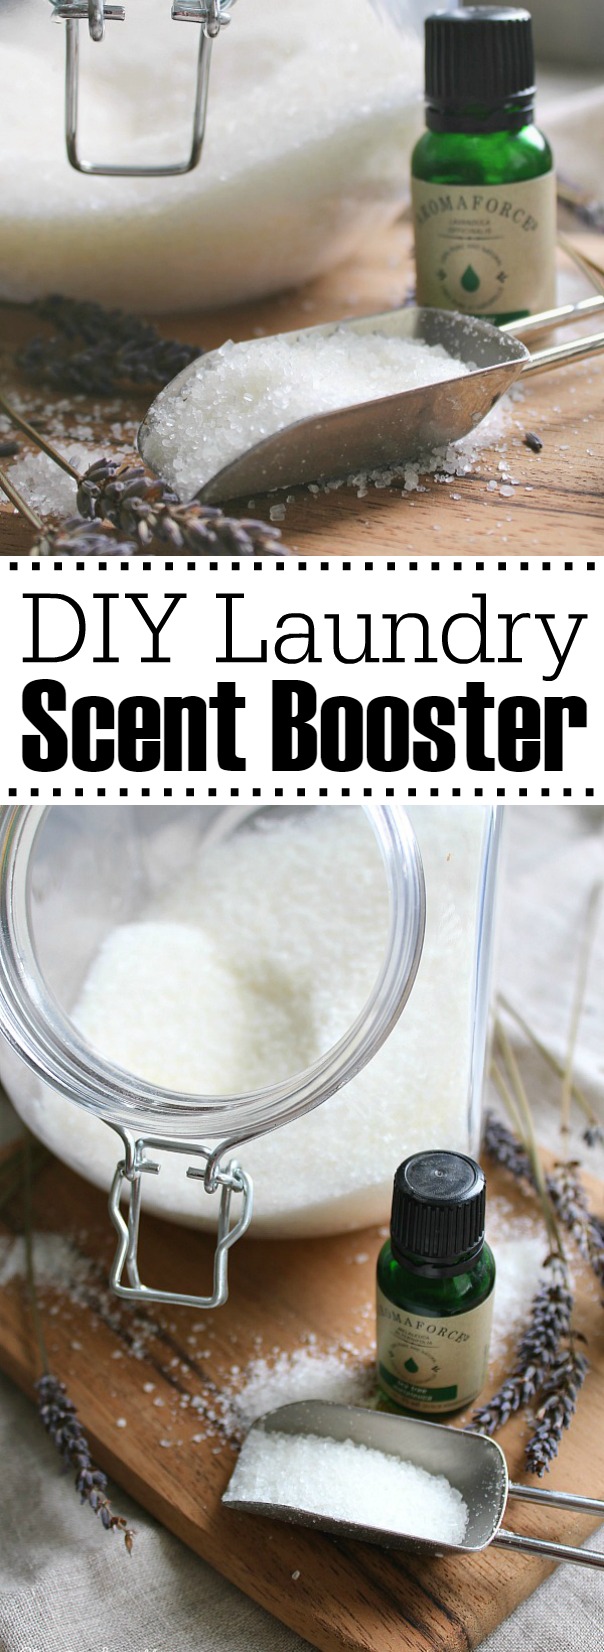 Try this easy DIY laundry scent booster and follow these simple tips for the freshest smelling laundry without using any harsh chemicals.